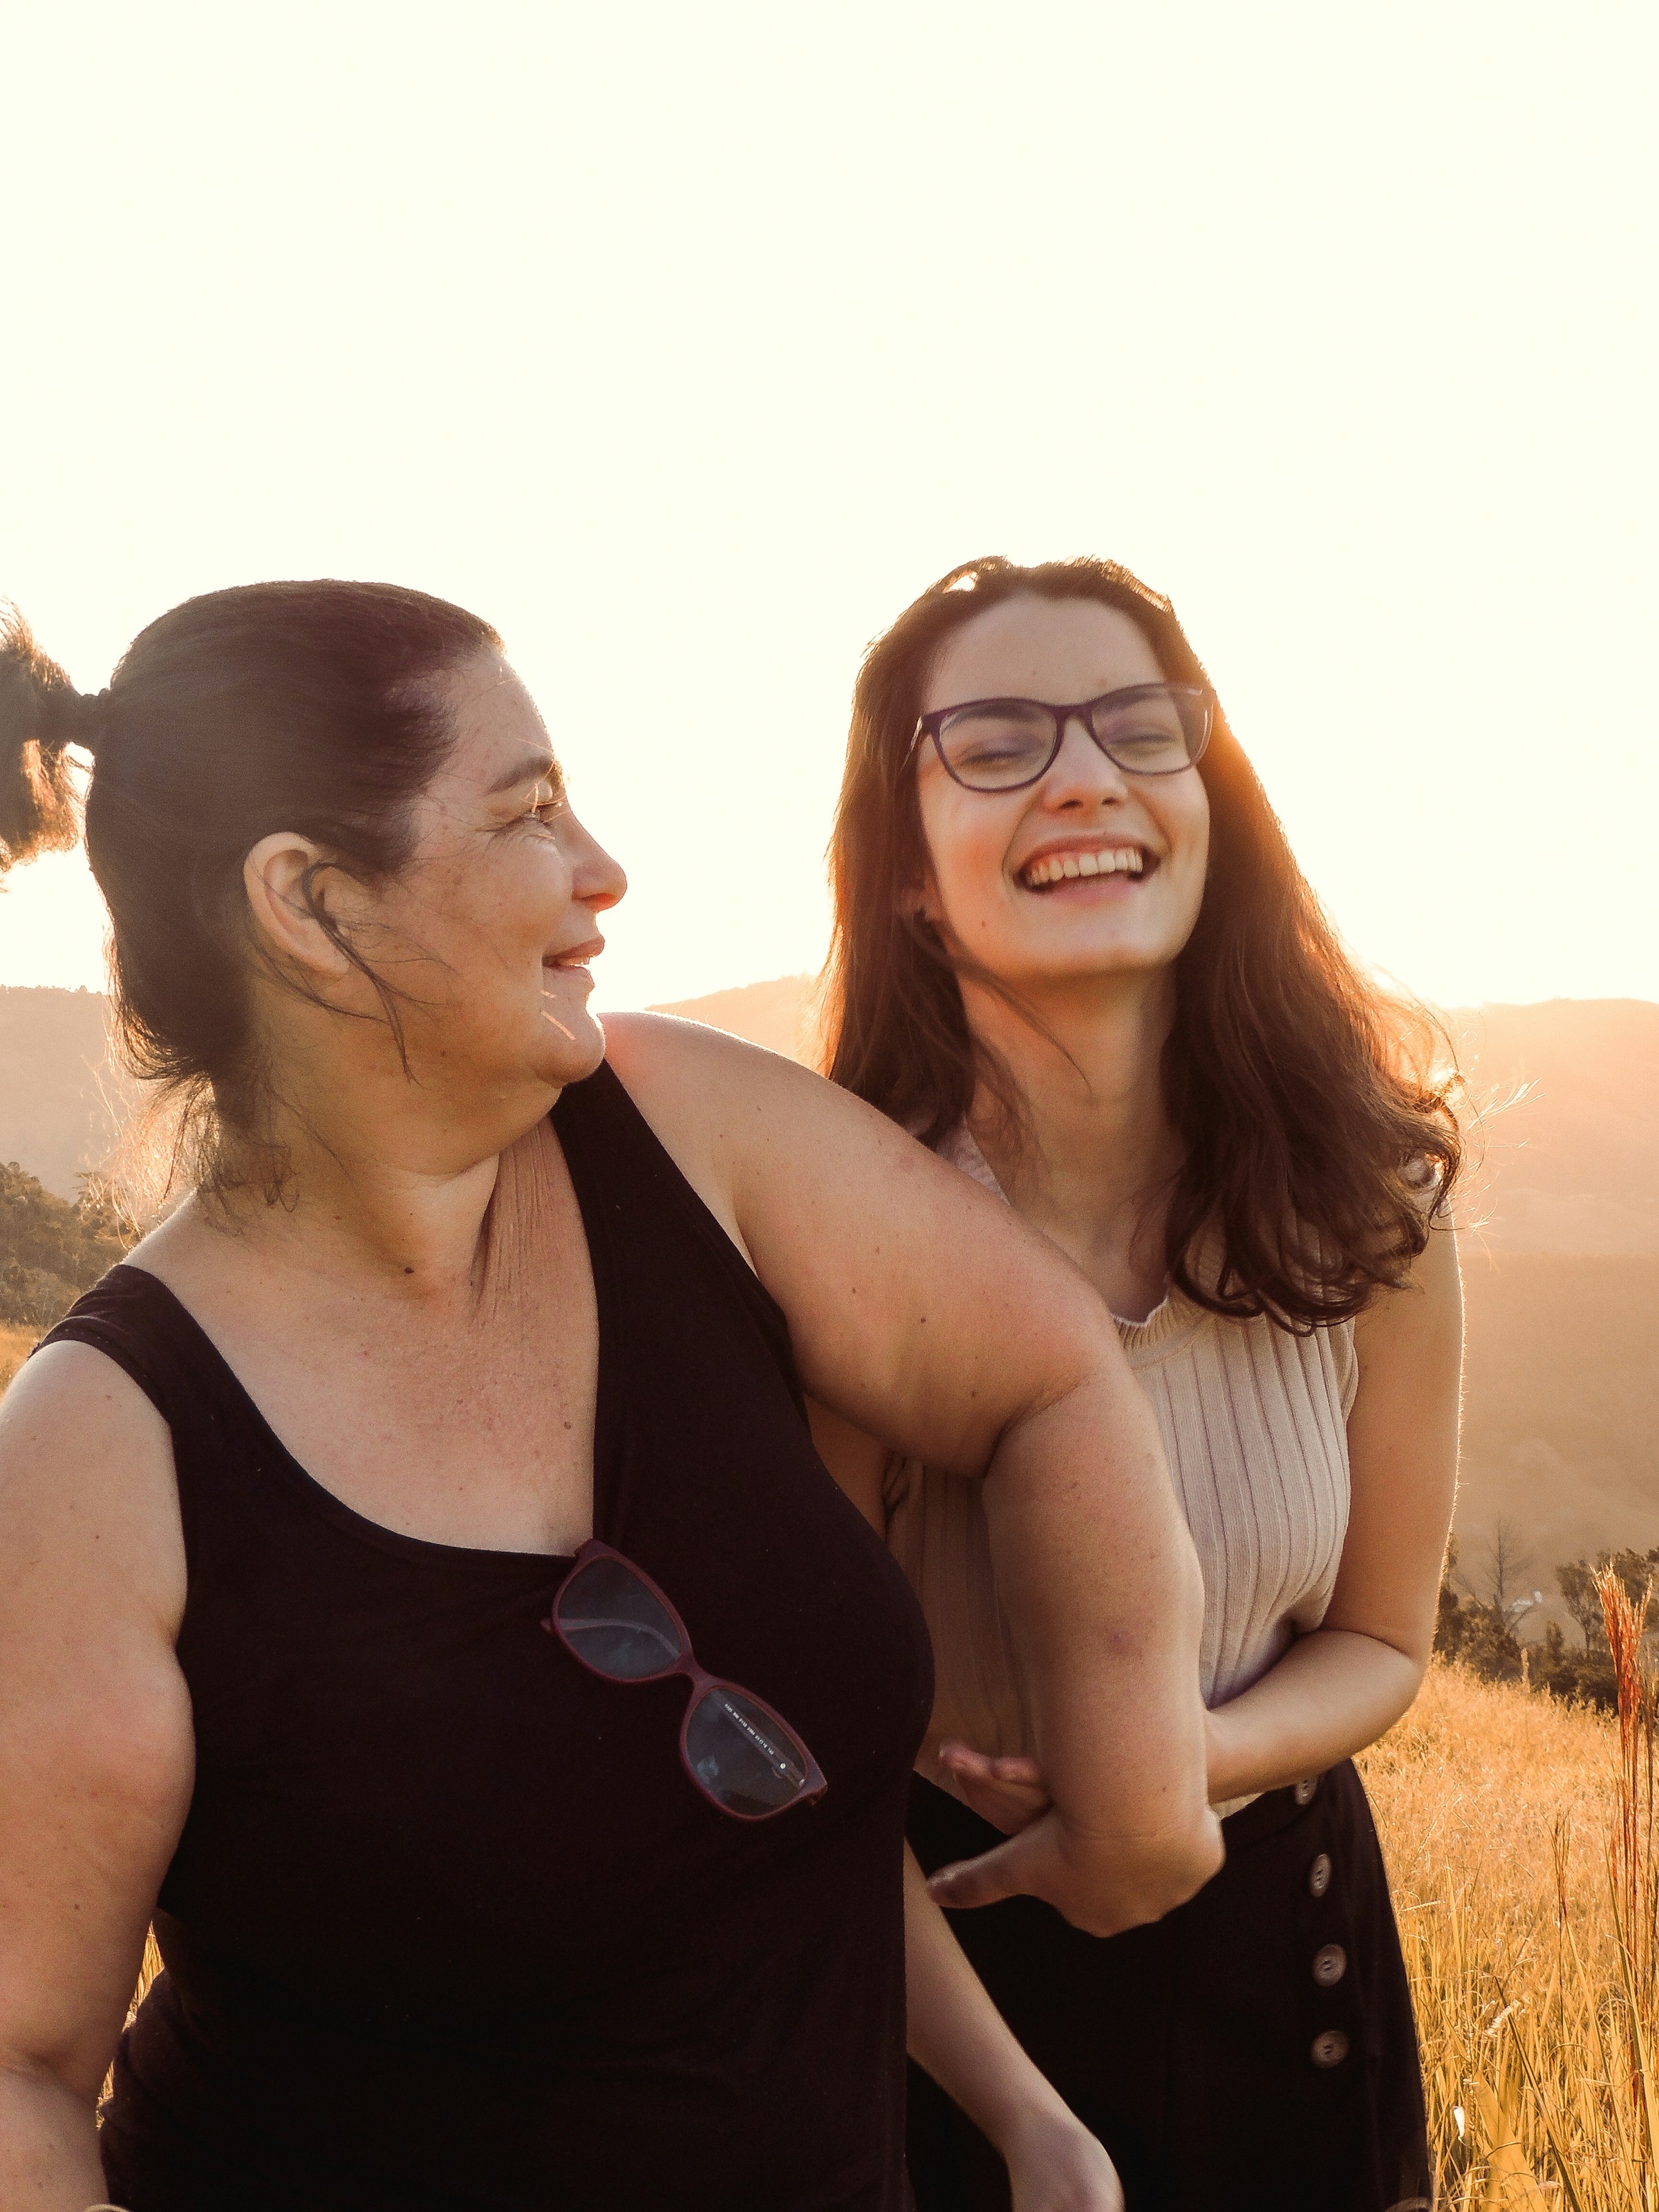 A smiling mother and daughter duo | Source: Unsplash